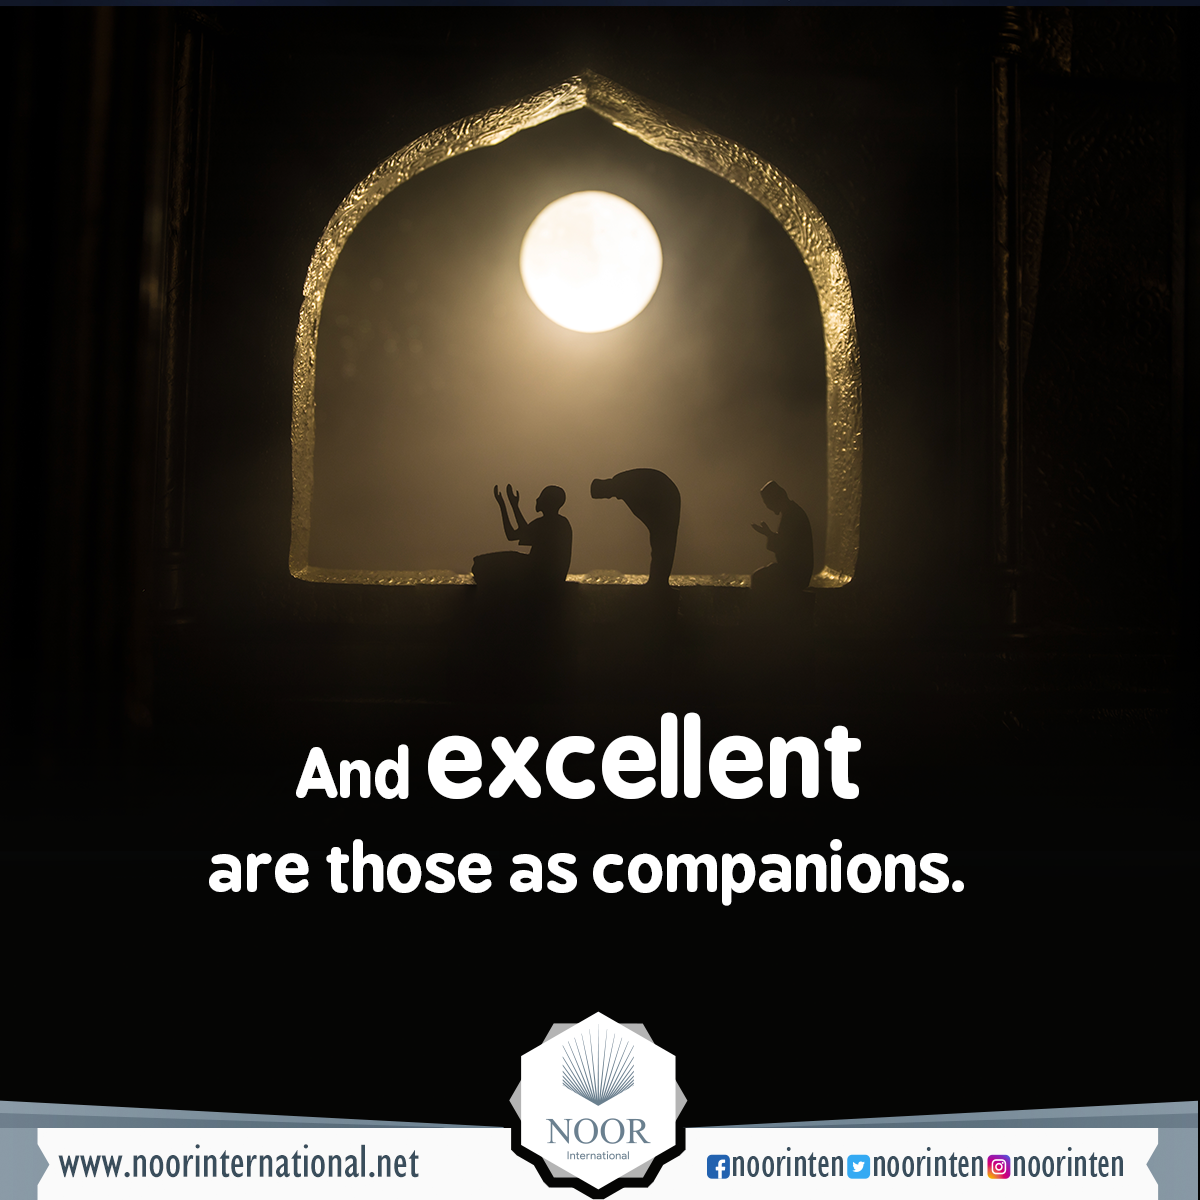 And excellent are those as companions.